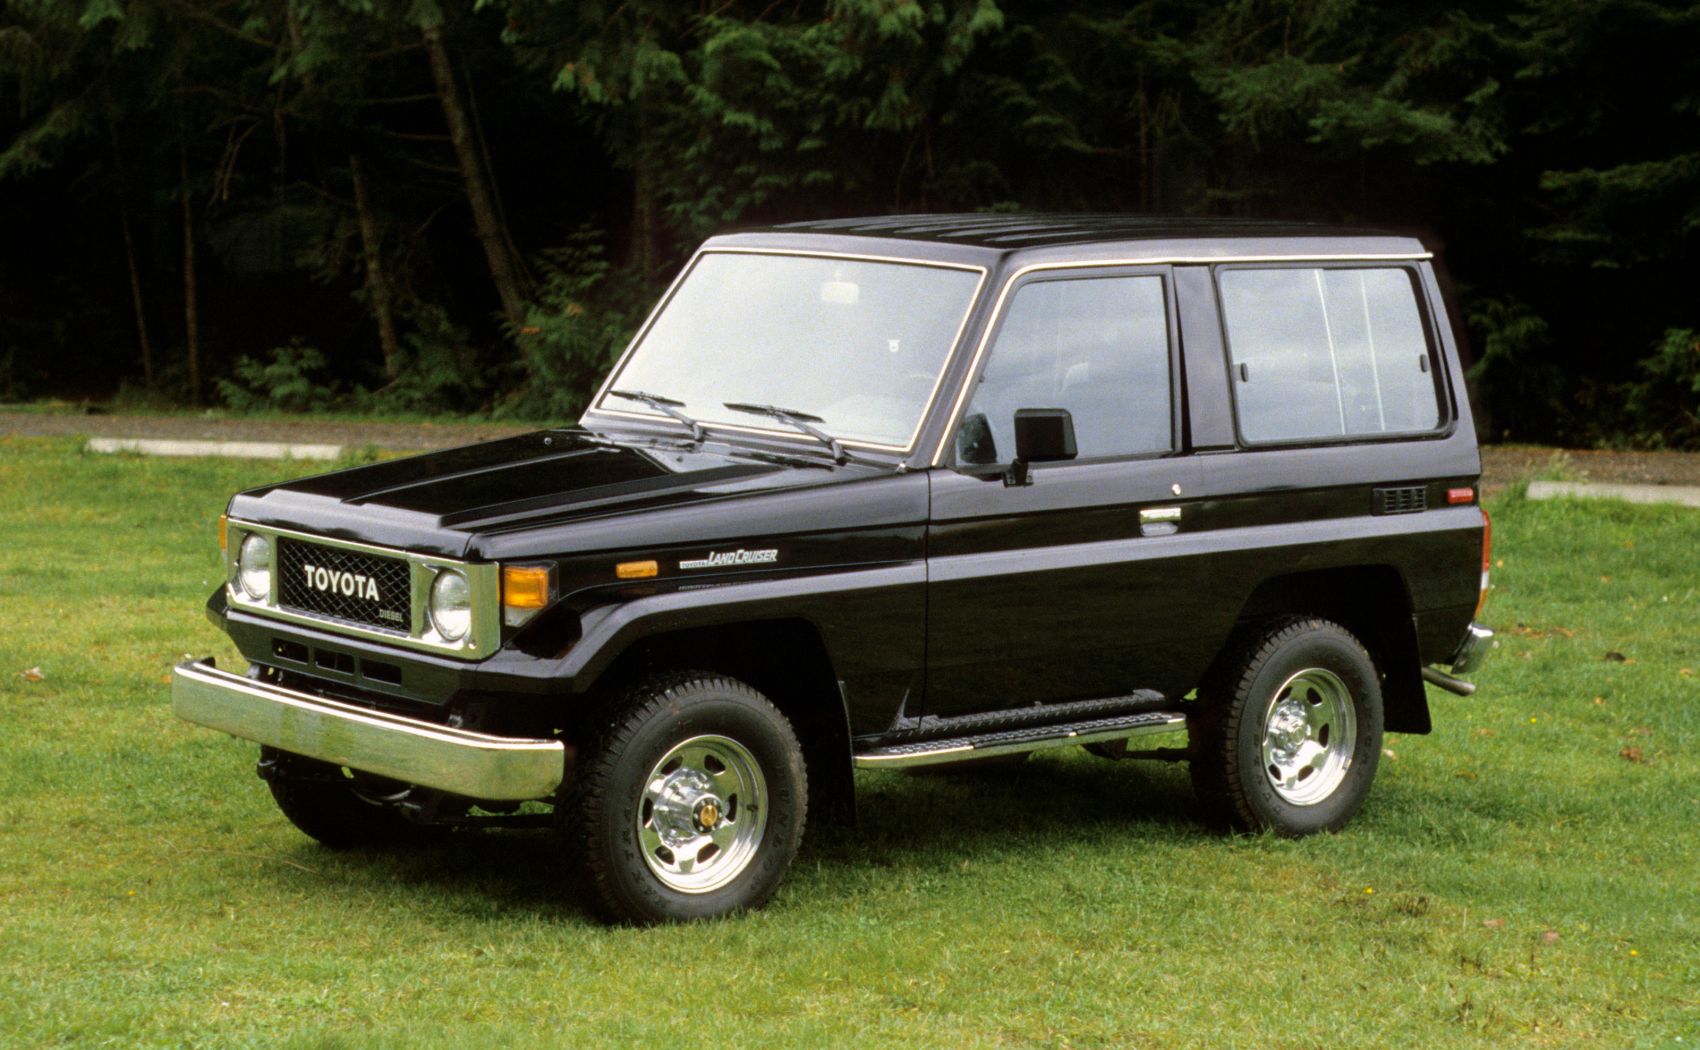 a-look-at-the-iconic-70-series-land-cruiser-the-most-reliable-toyota-ever-built_5.jpg